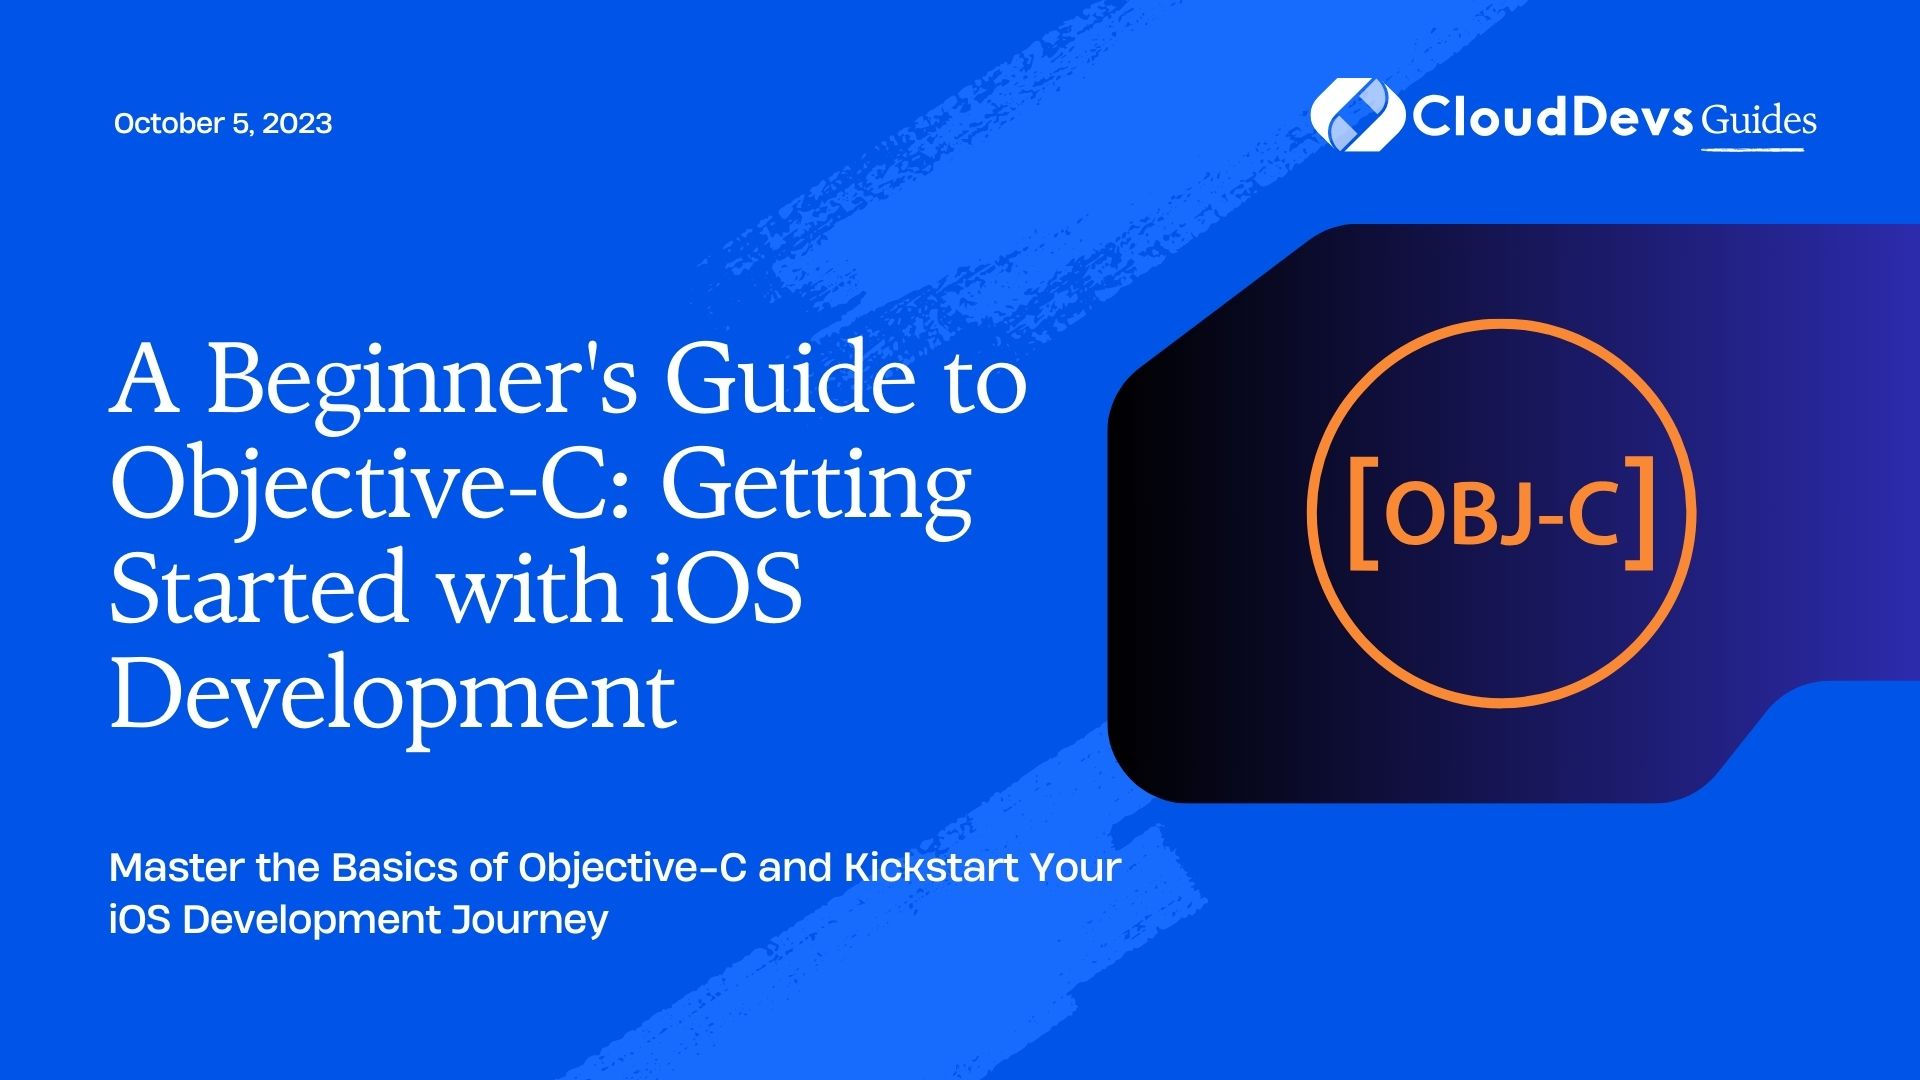 A Beginner's Guide to Objective-C: Getting Started with iOS Development